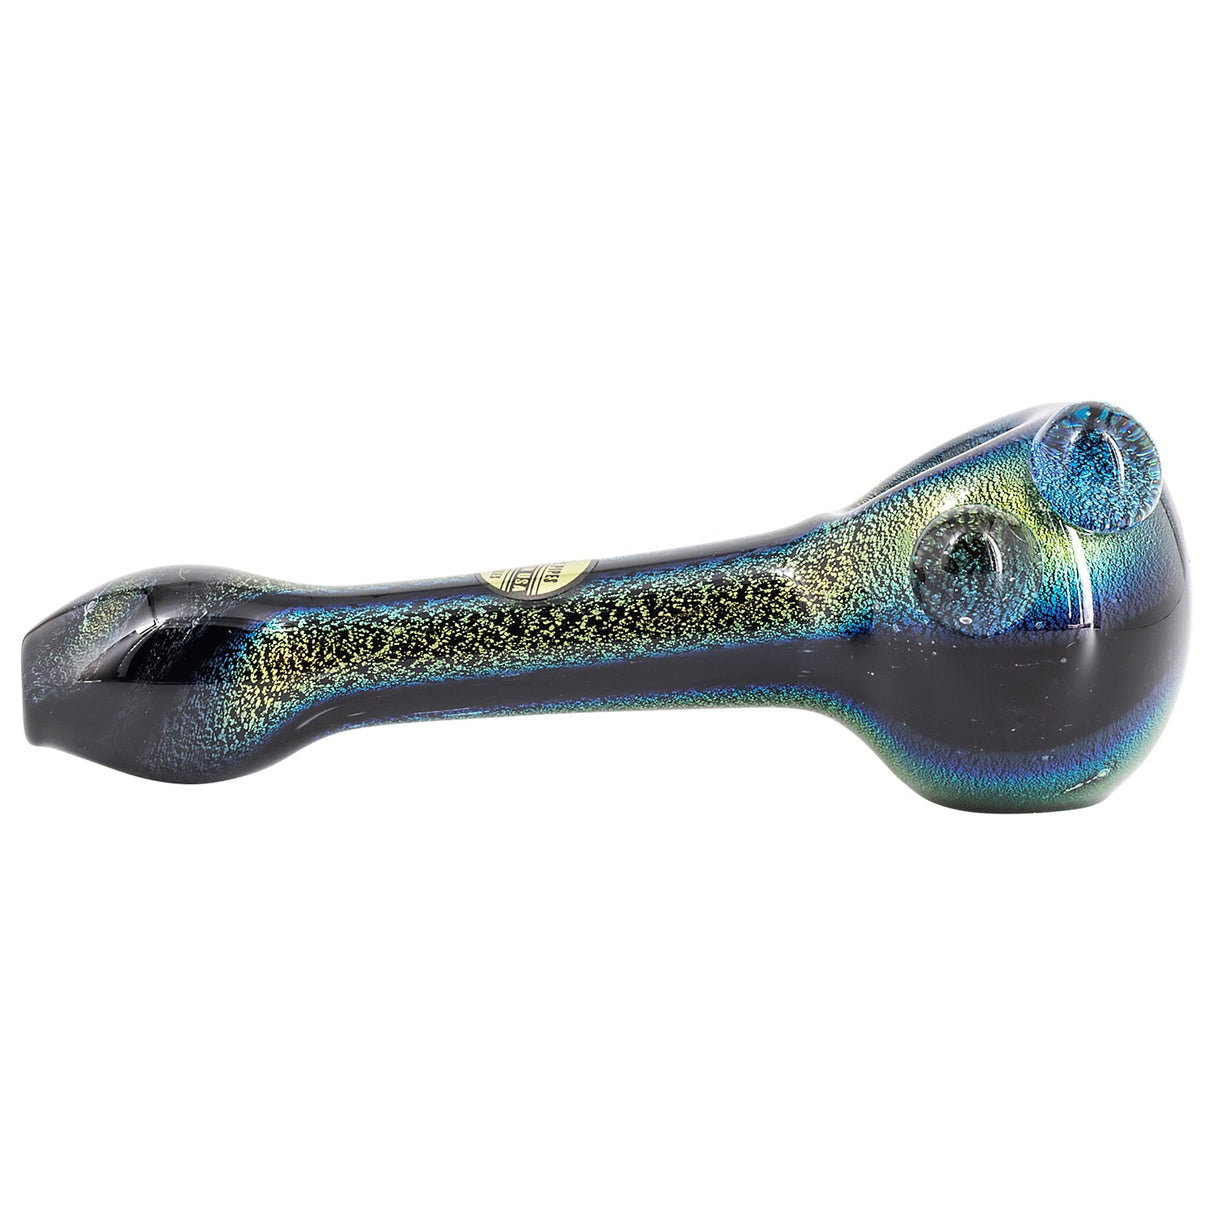 LA Pipes Dichro Spoon Pipe with Clear Marbles, 4" Borosilicate Glass, Side View